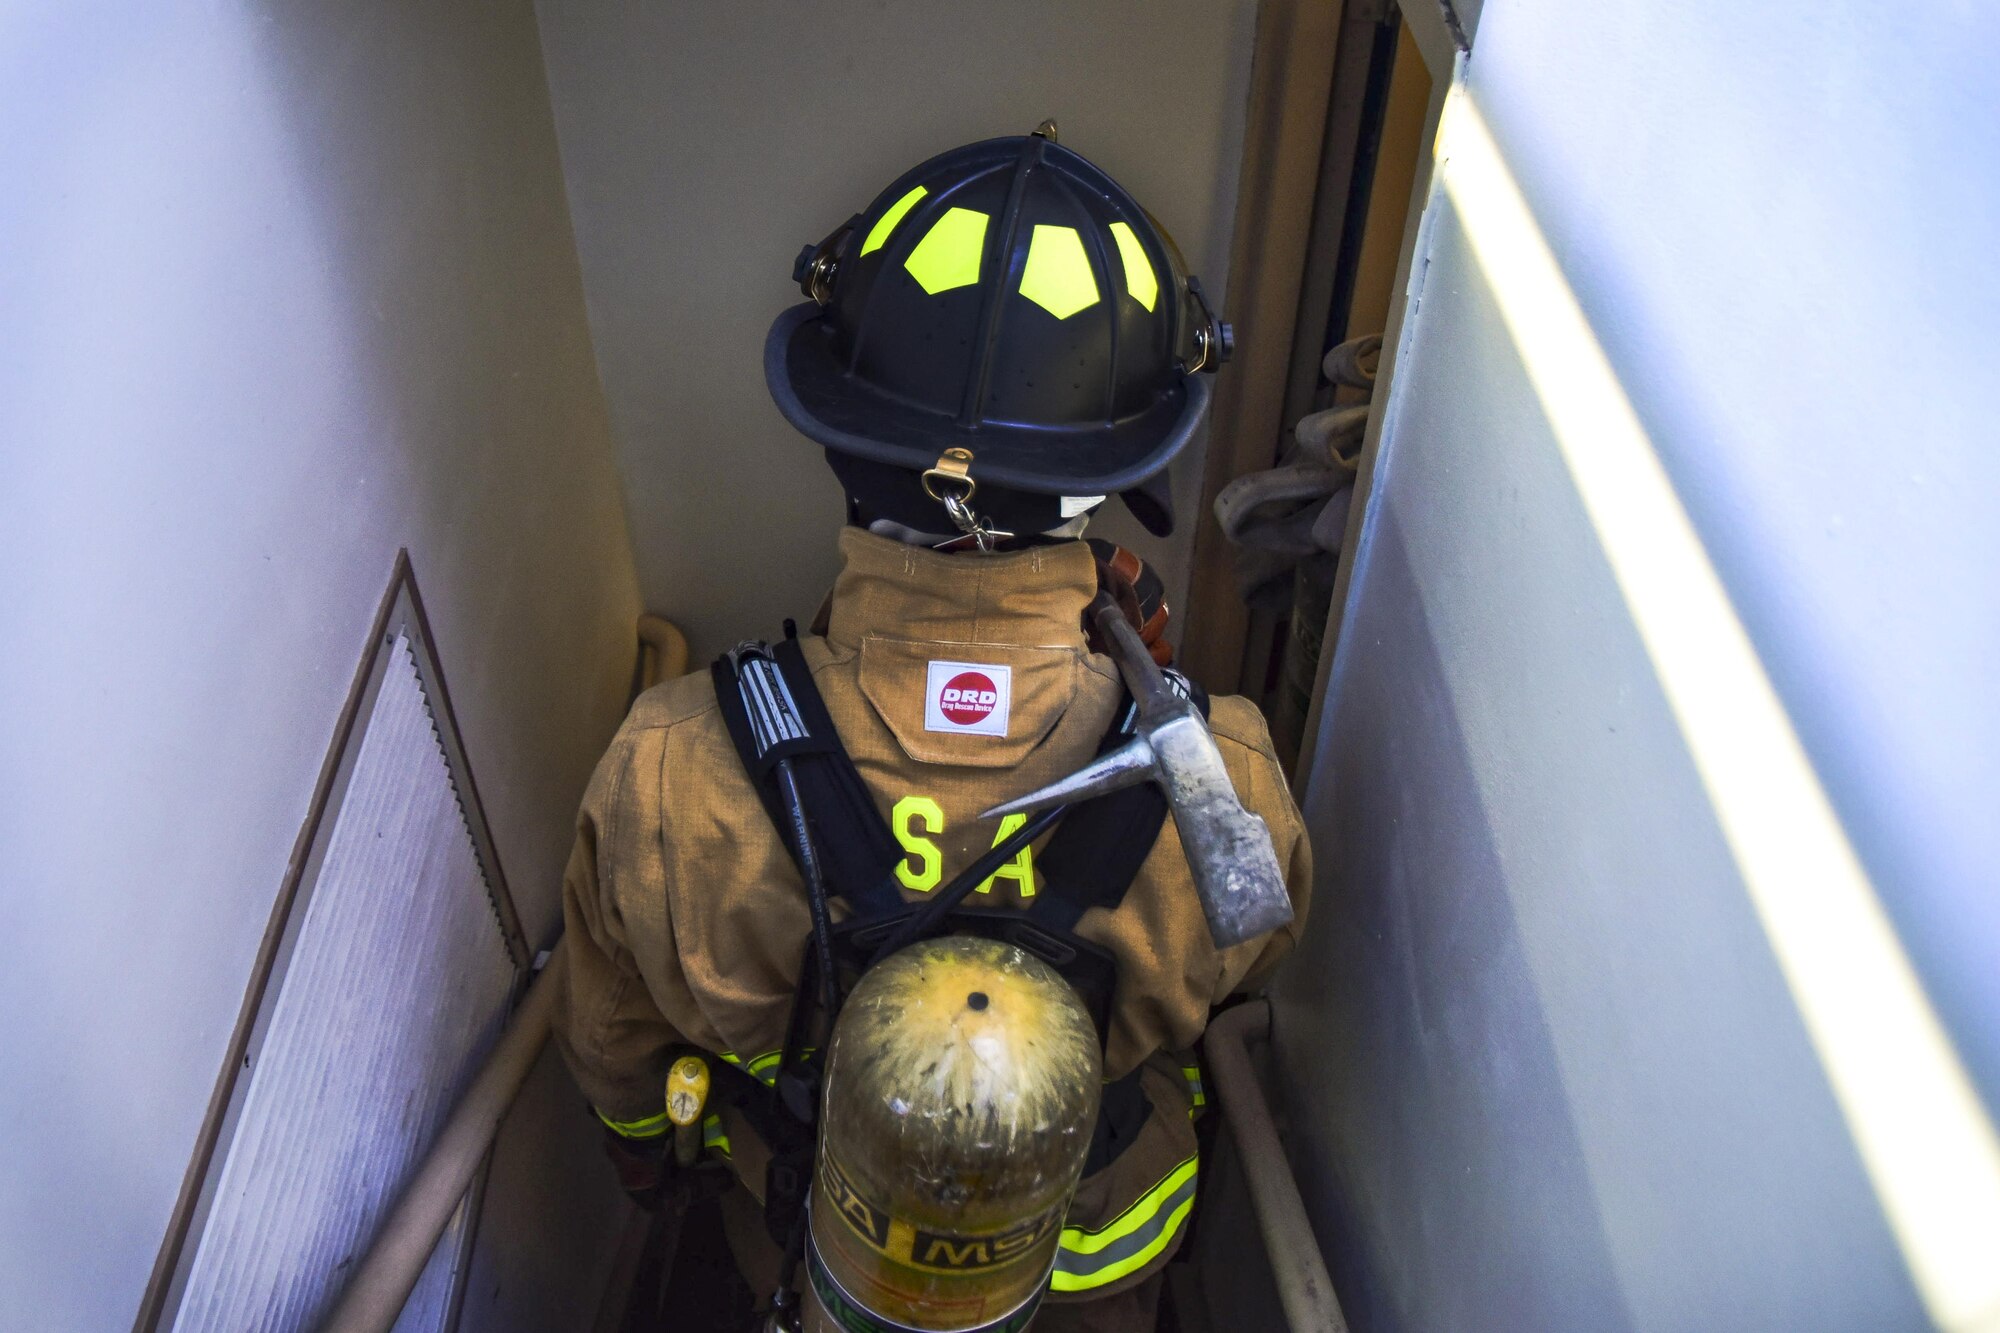 Airman 1st Class Brian Velten, 99th Civil Engineer Squadron firefighter, descends the air traffic control stairwell during Red Flag 17-3 at Nellis Air Force Base, Nev., July 18, 2017. The team raced to the top of the tower to practice evacuation procedures during an electrical fire or medical emergency. (U.S. Air Force photo by Airman 1st Class Andrew D. Sarver/Released)